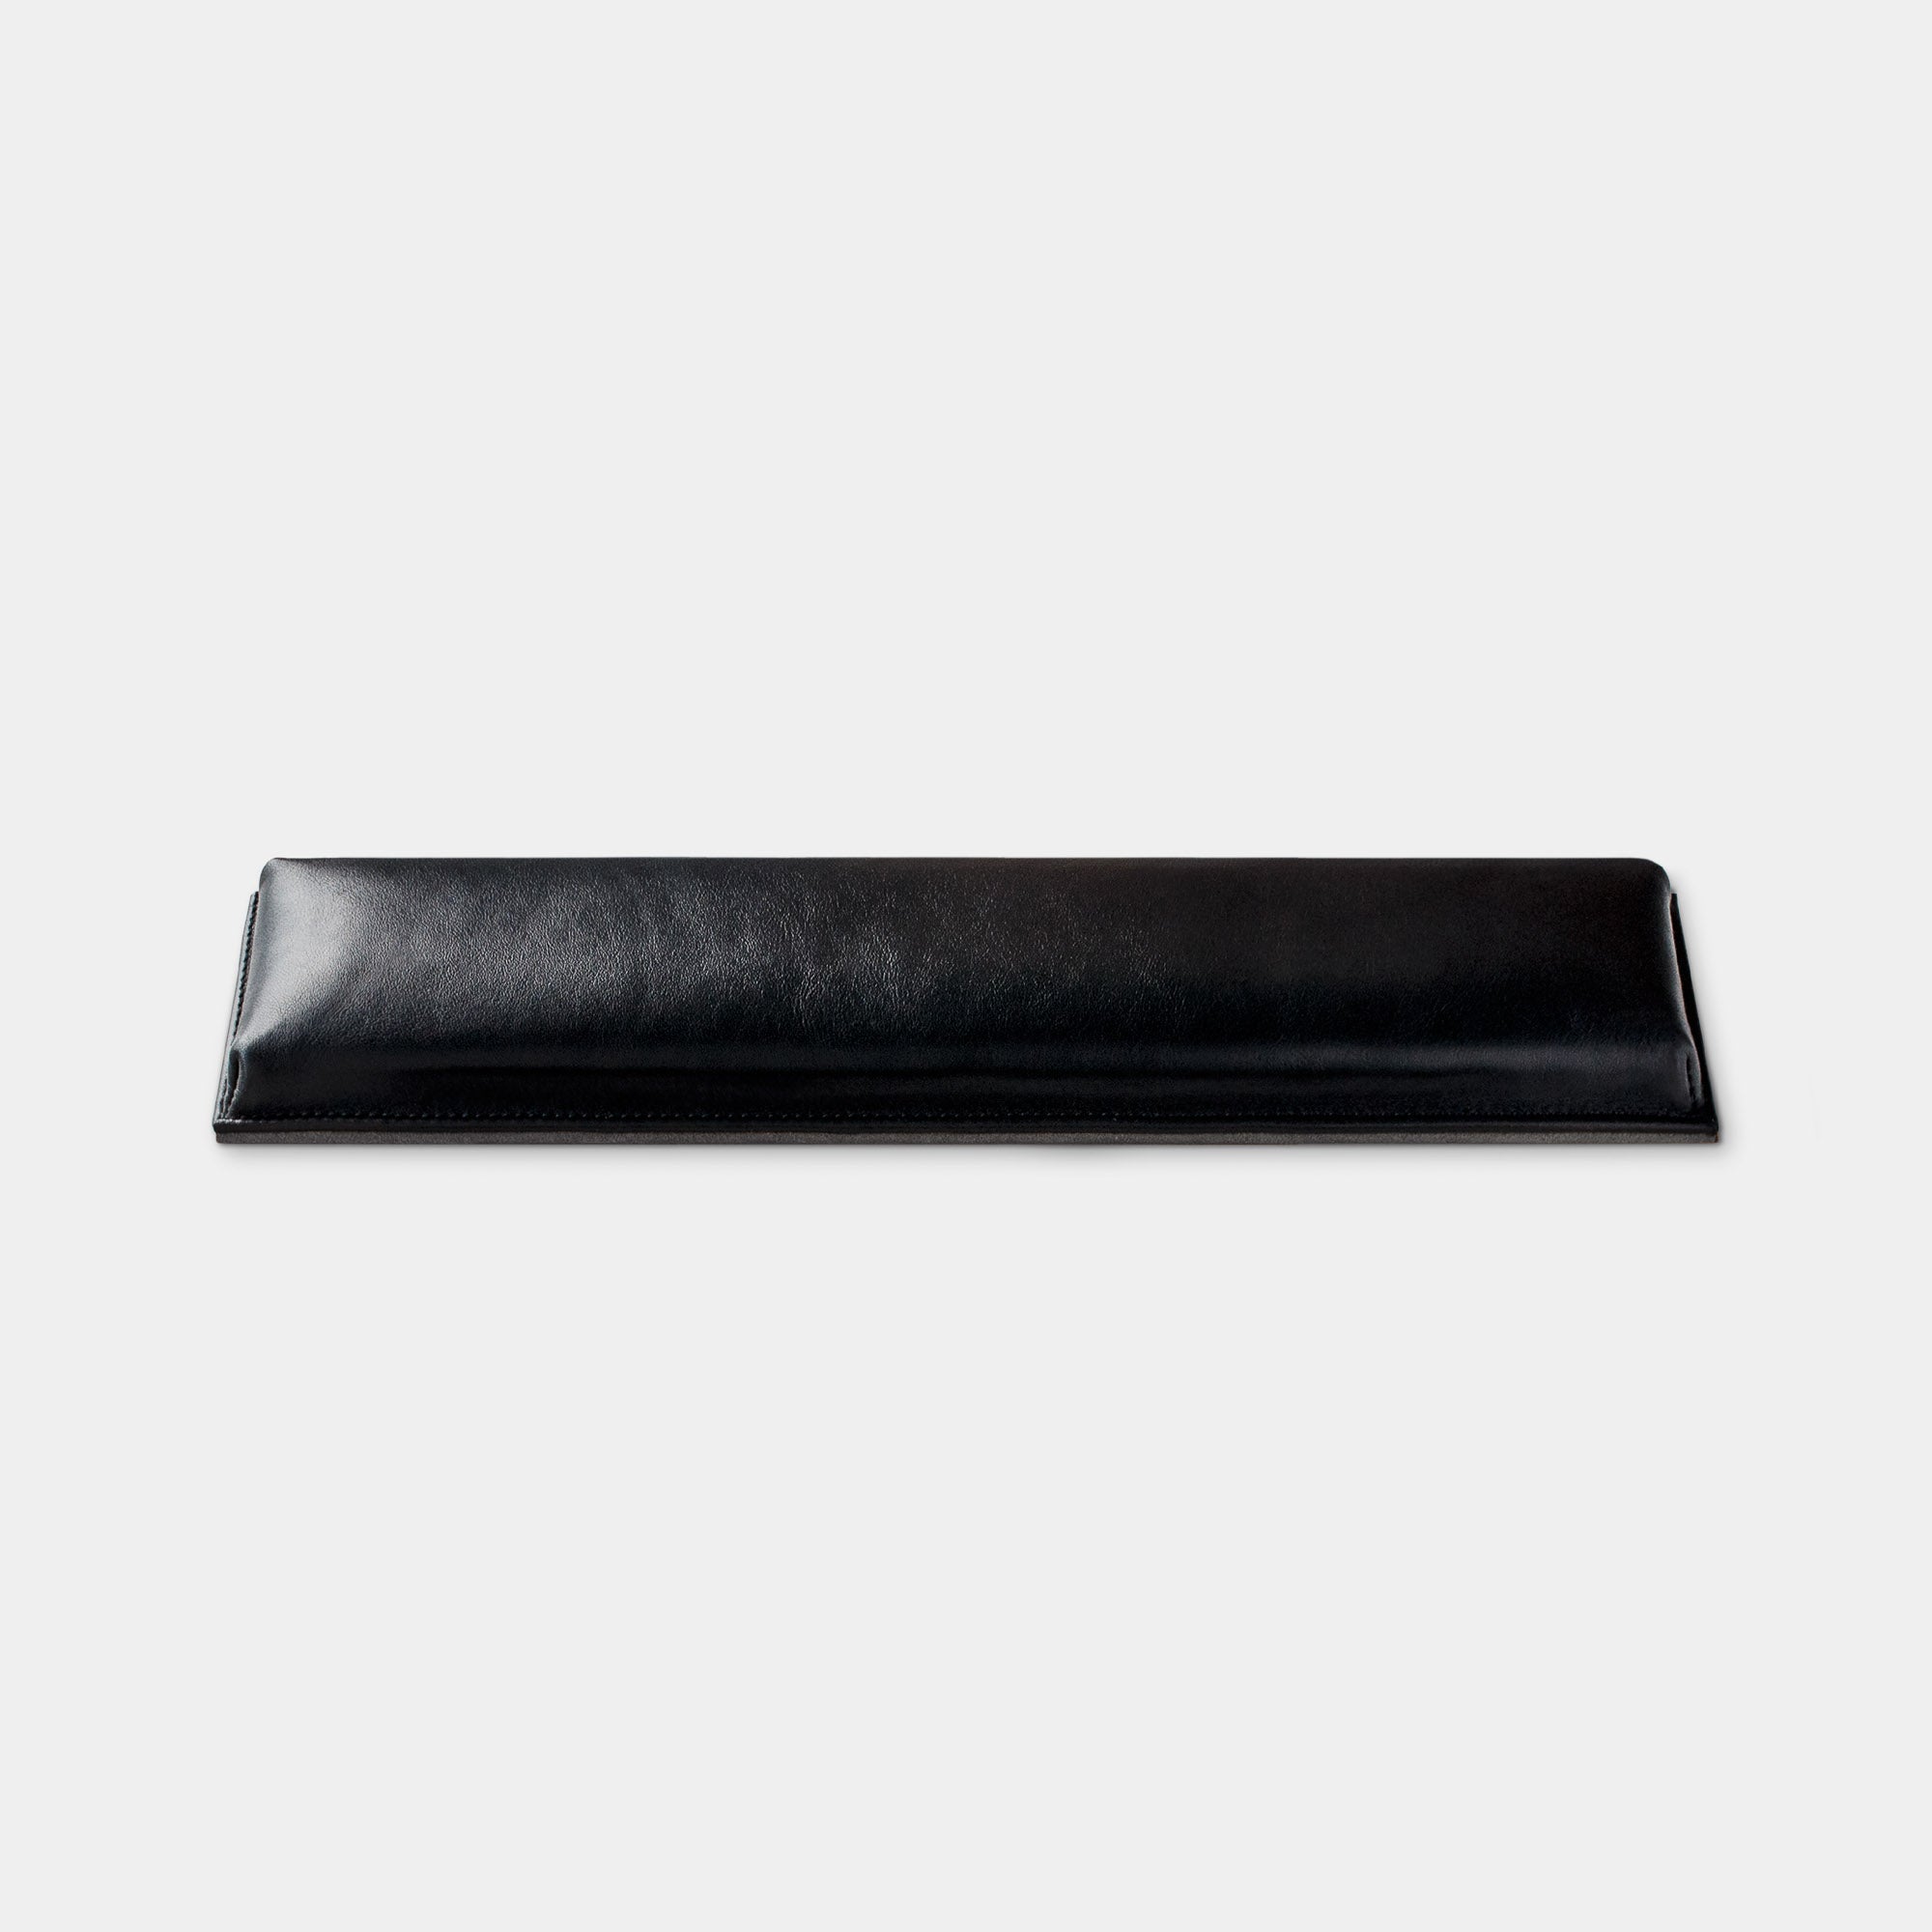 [Group Buy] Turbulent Labs x SLK Dessau Leather Accessories